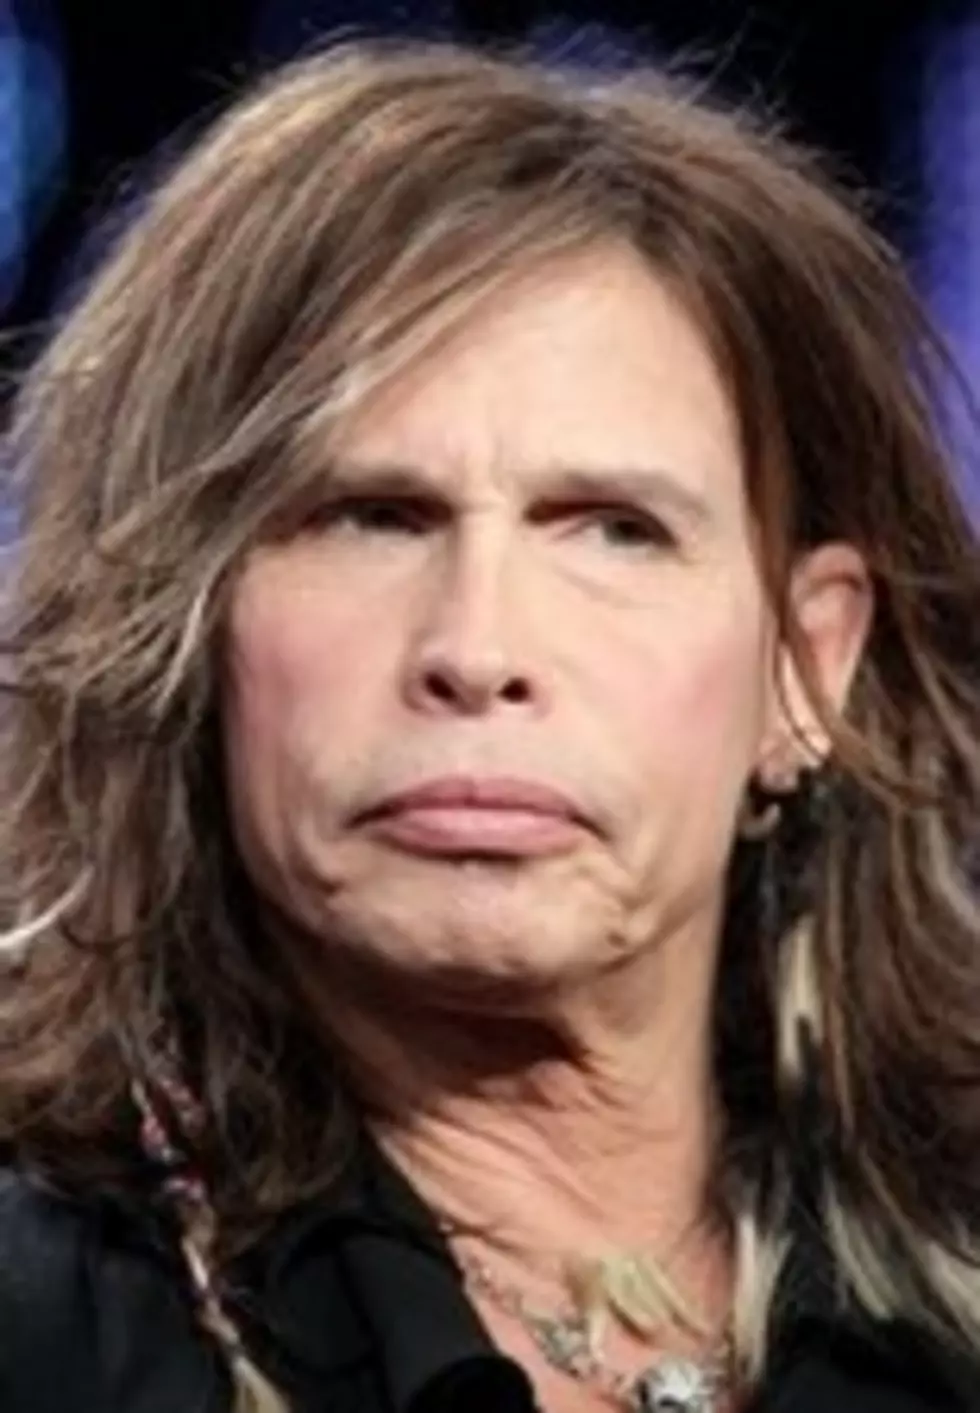 25 Things You Don’t Know About Me: Steven Tyler